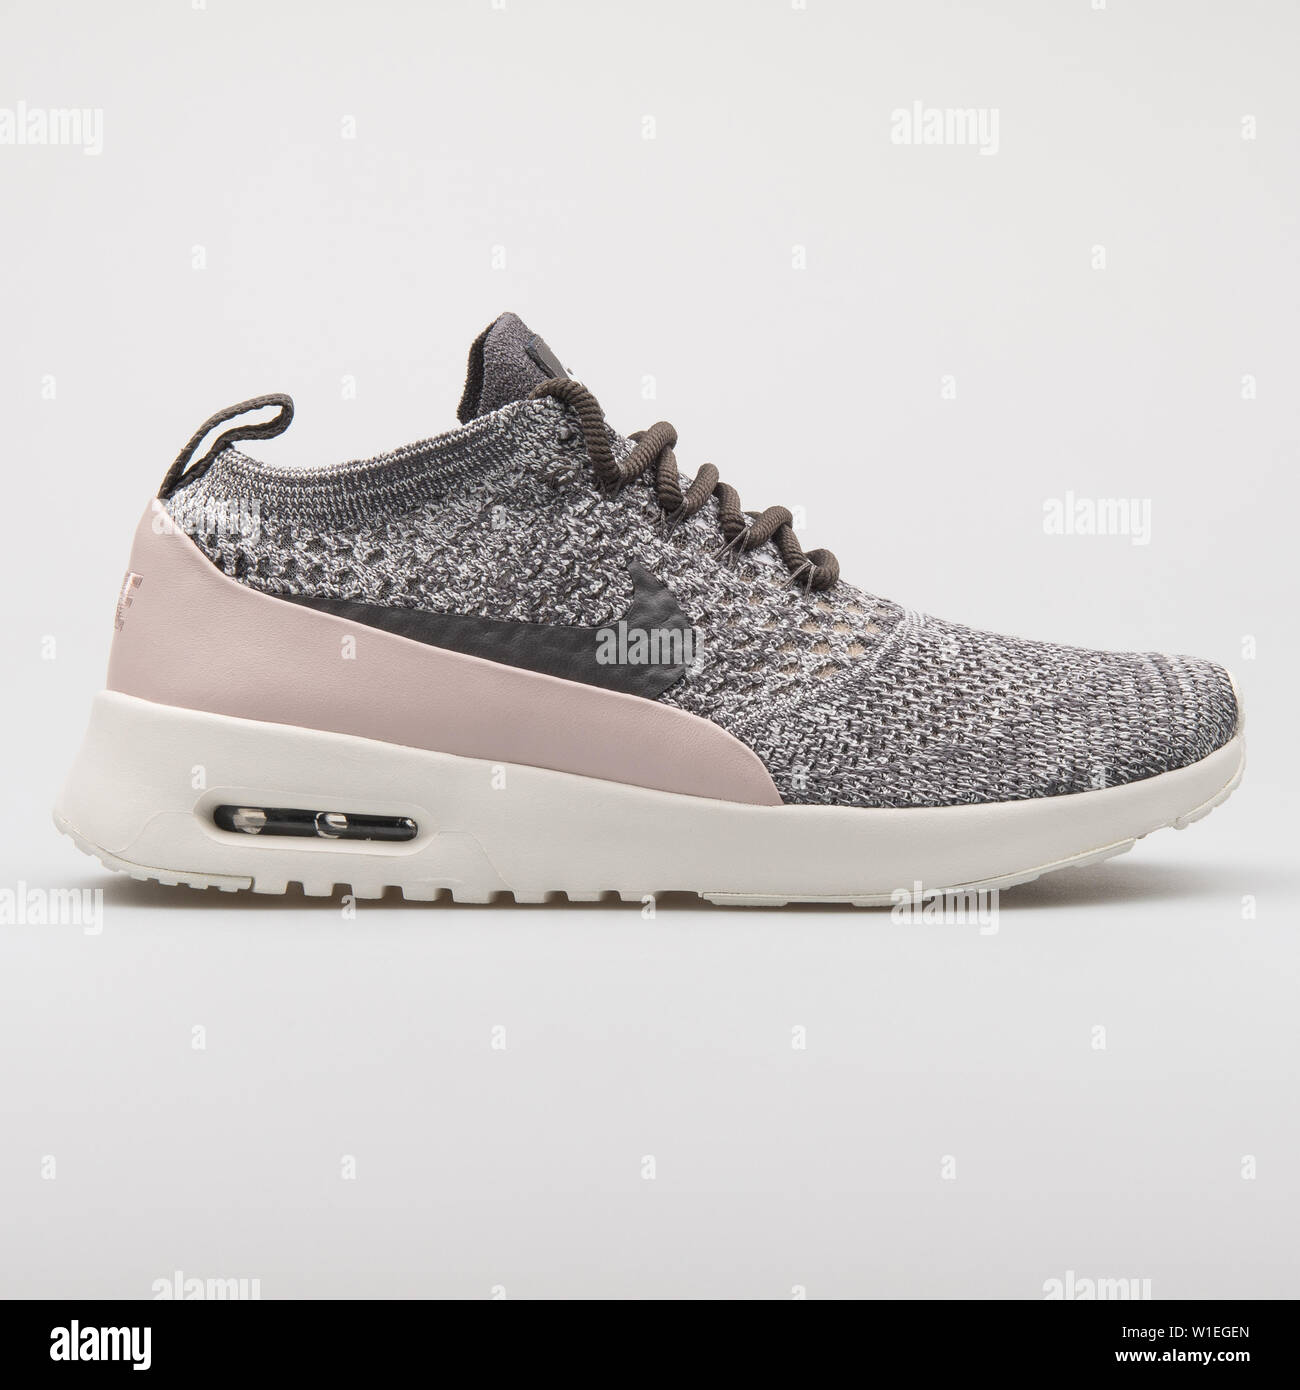 VIENNA, AUSTRIA - AUGUST 7, 2017: Nike Air Max Thea Ultra Flyknit grey and  pink sneaker on white background Stock Photo - Alamy